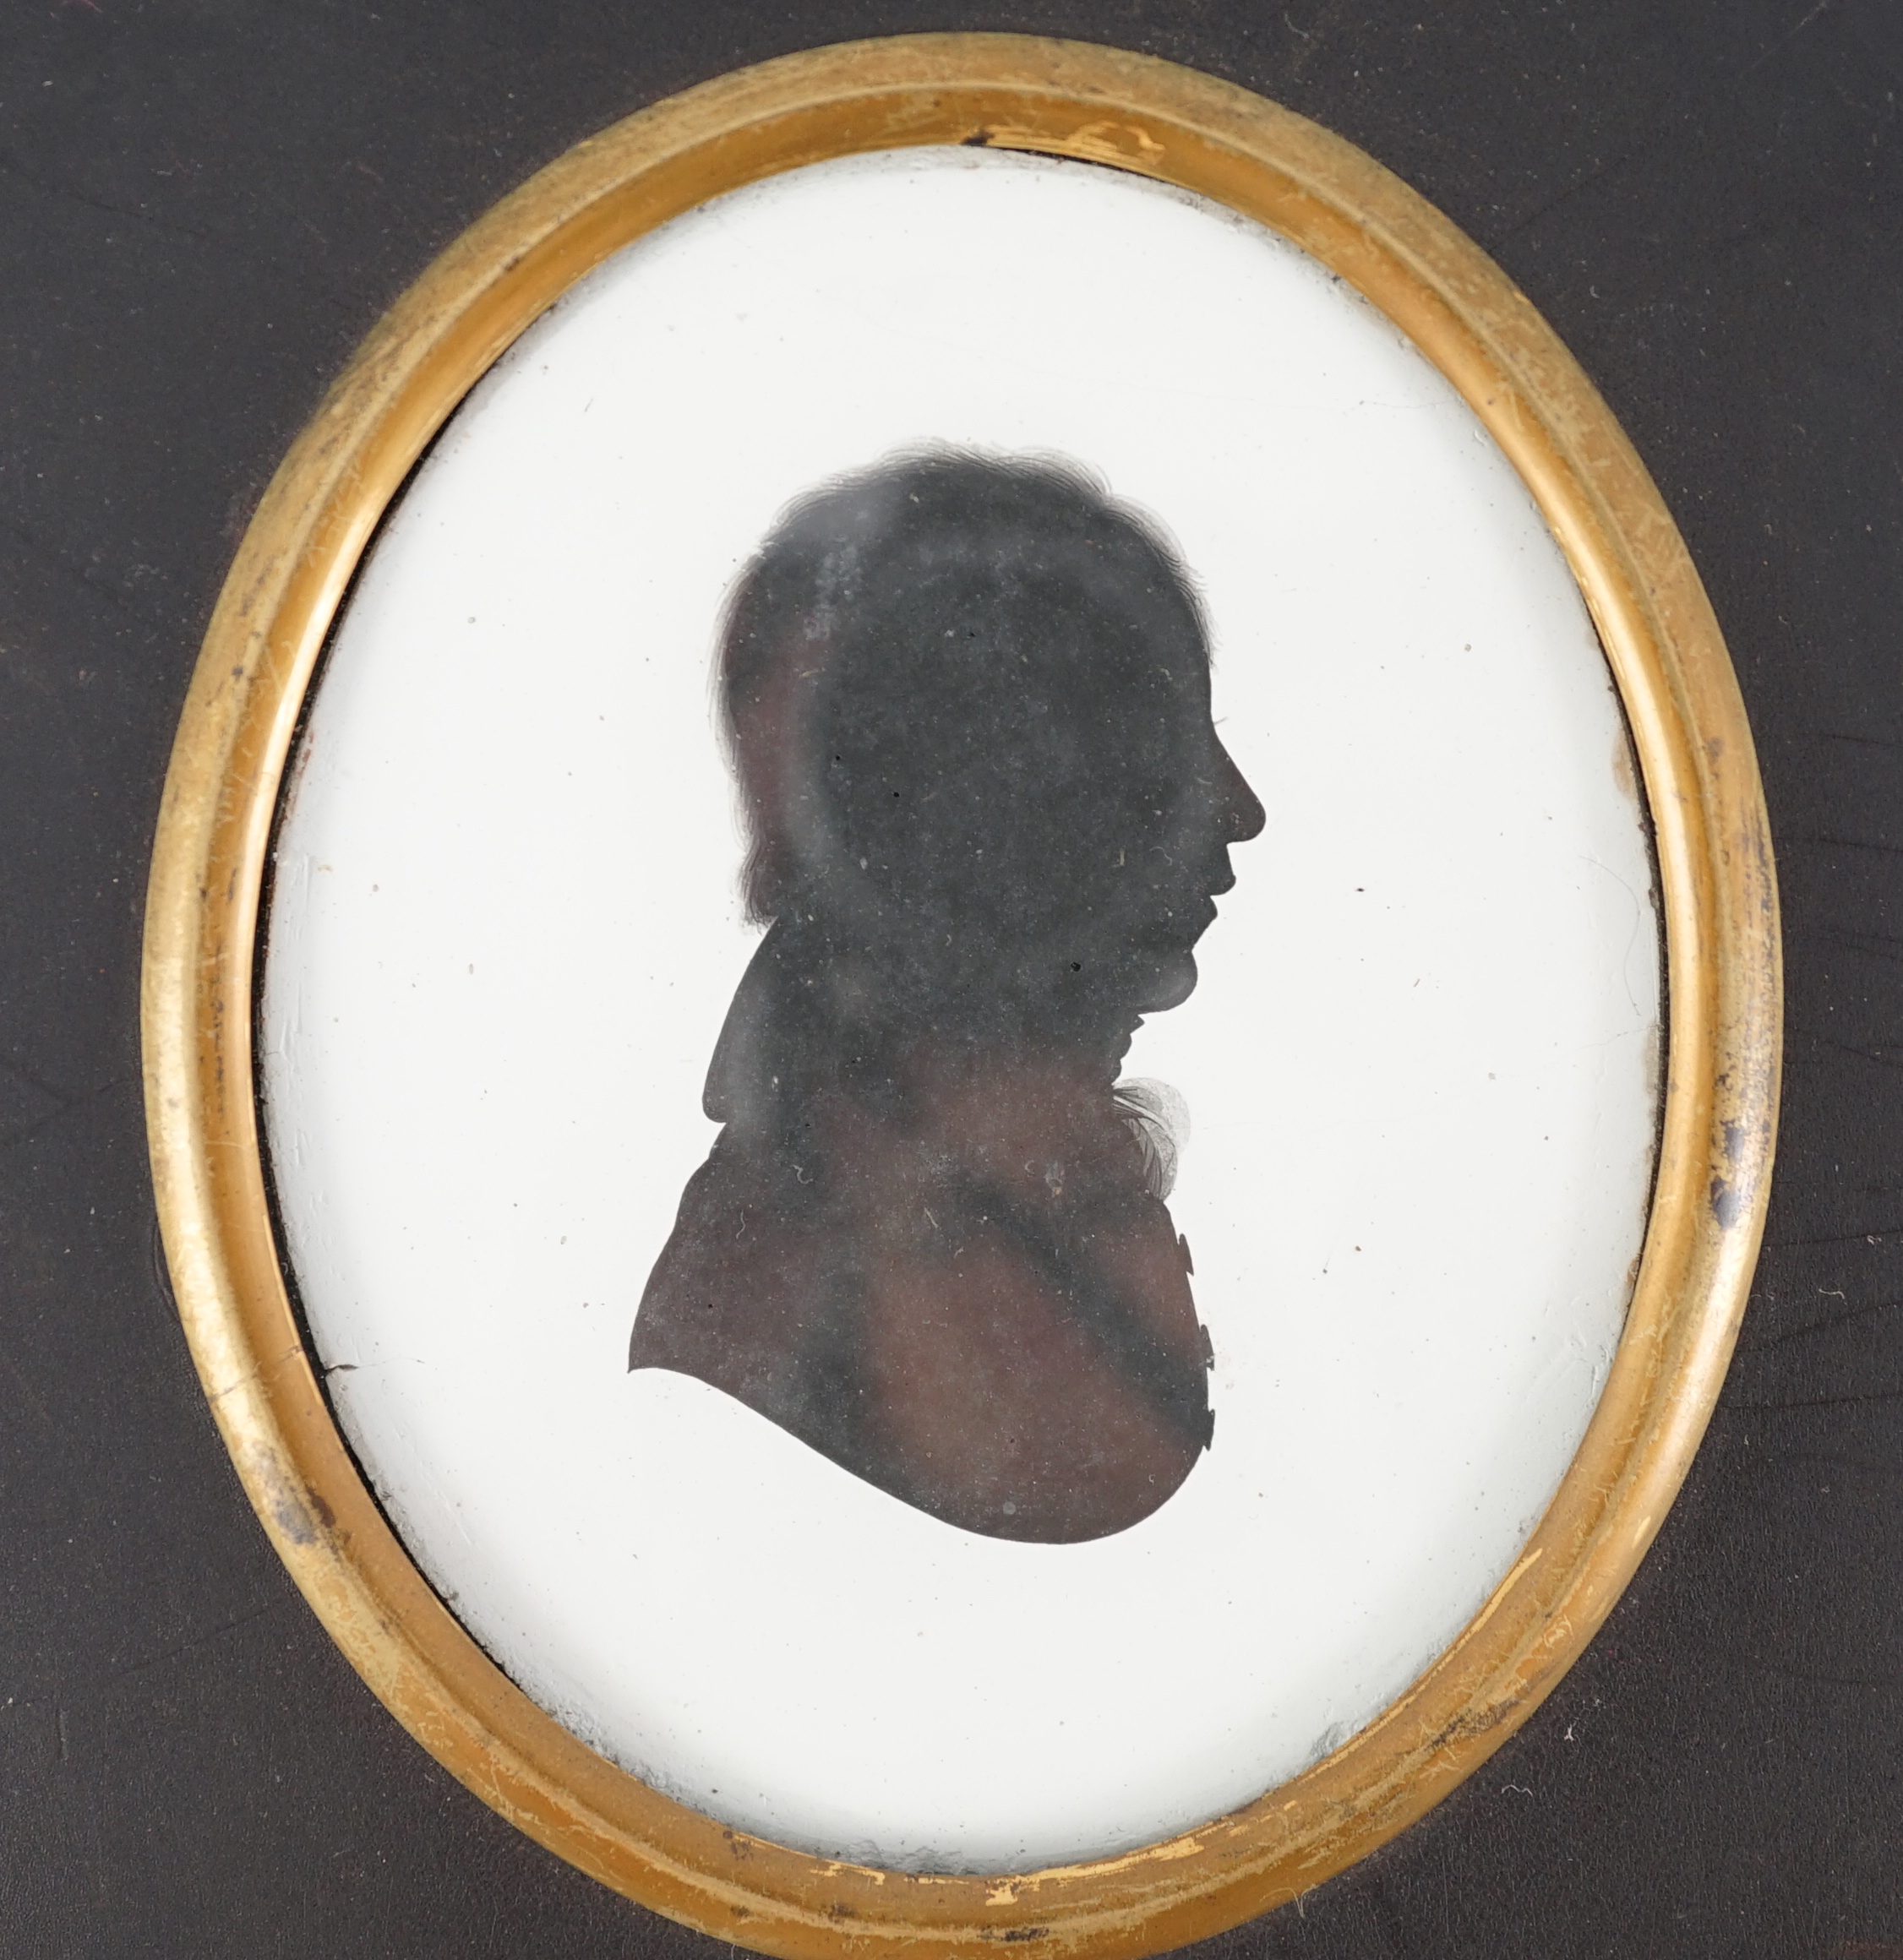 John Miers (1756-1821) and John Field (1772-1848), Silhouettes of a gentlemen, painted plaster (2), 8.5 x 7cm. & 7.8 x 6.5cm.